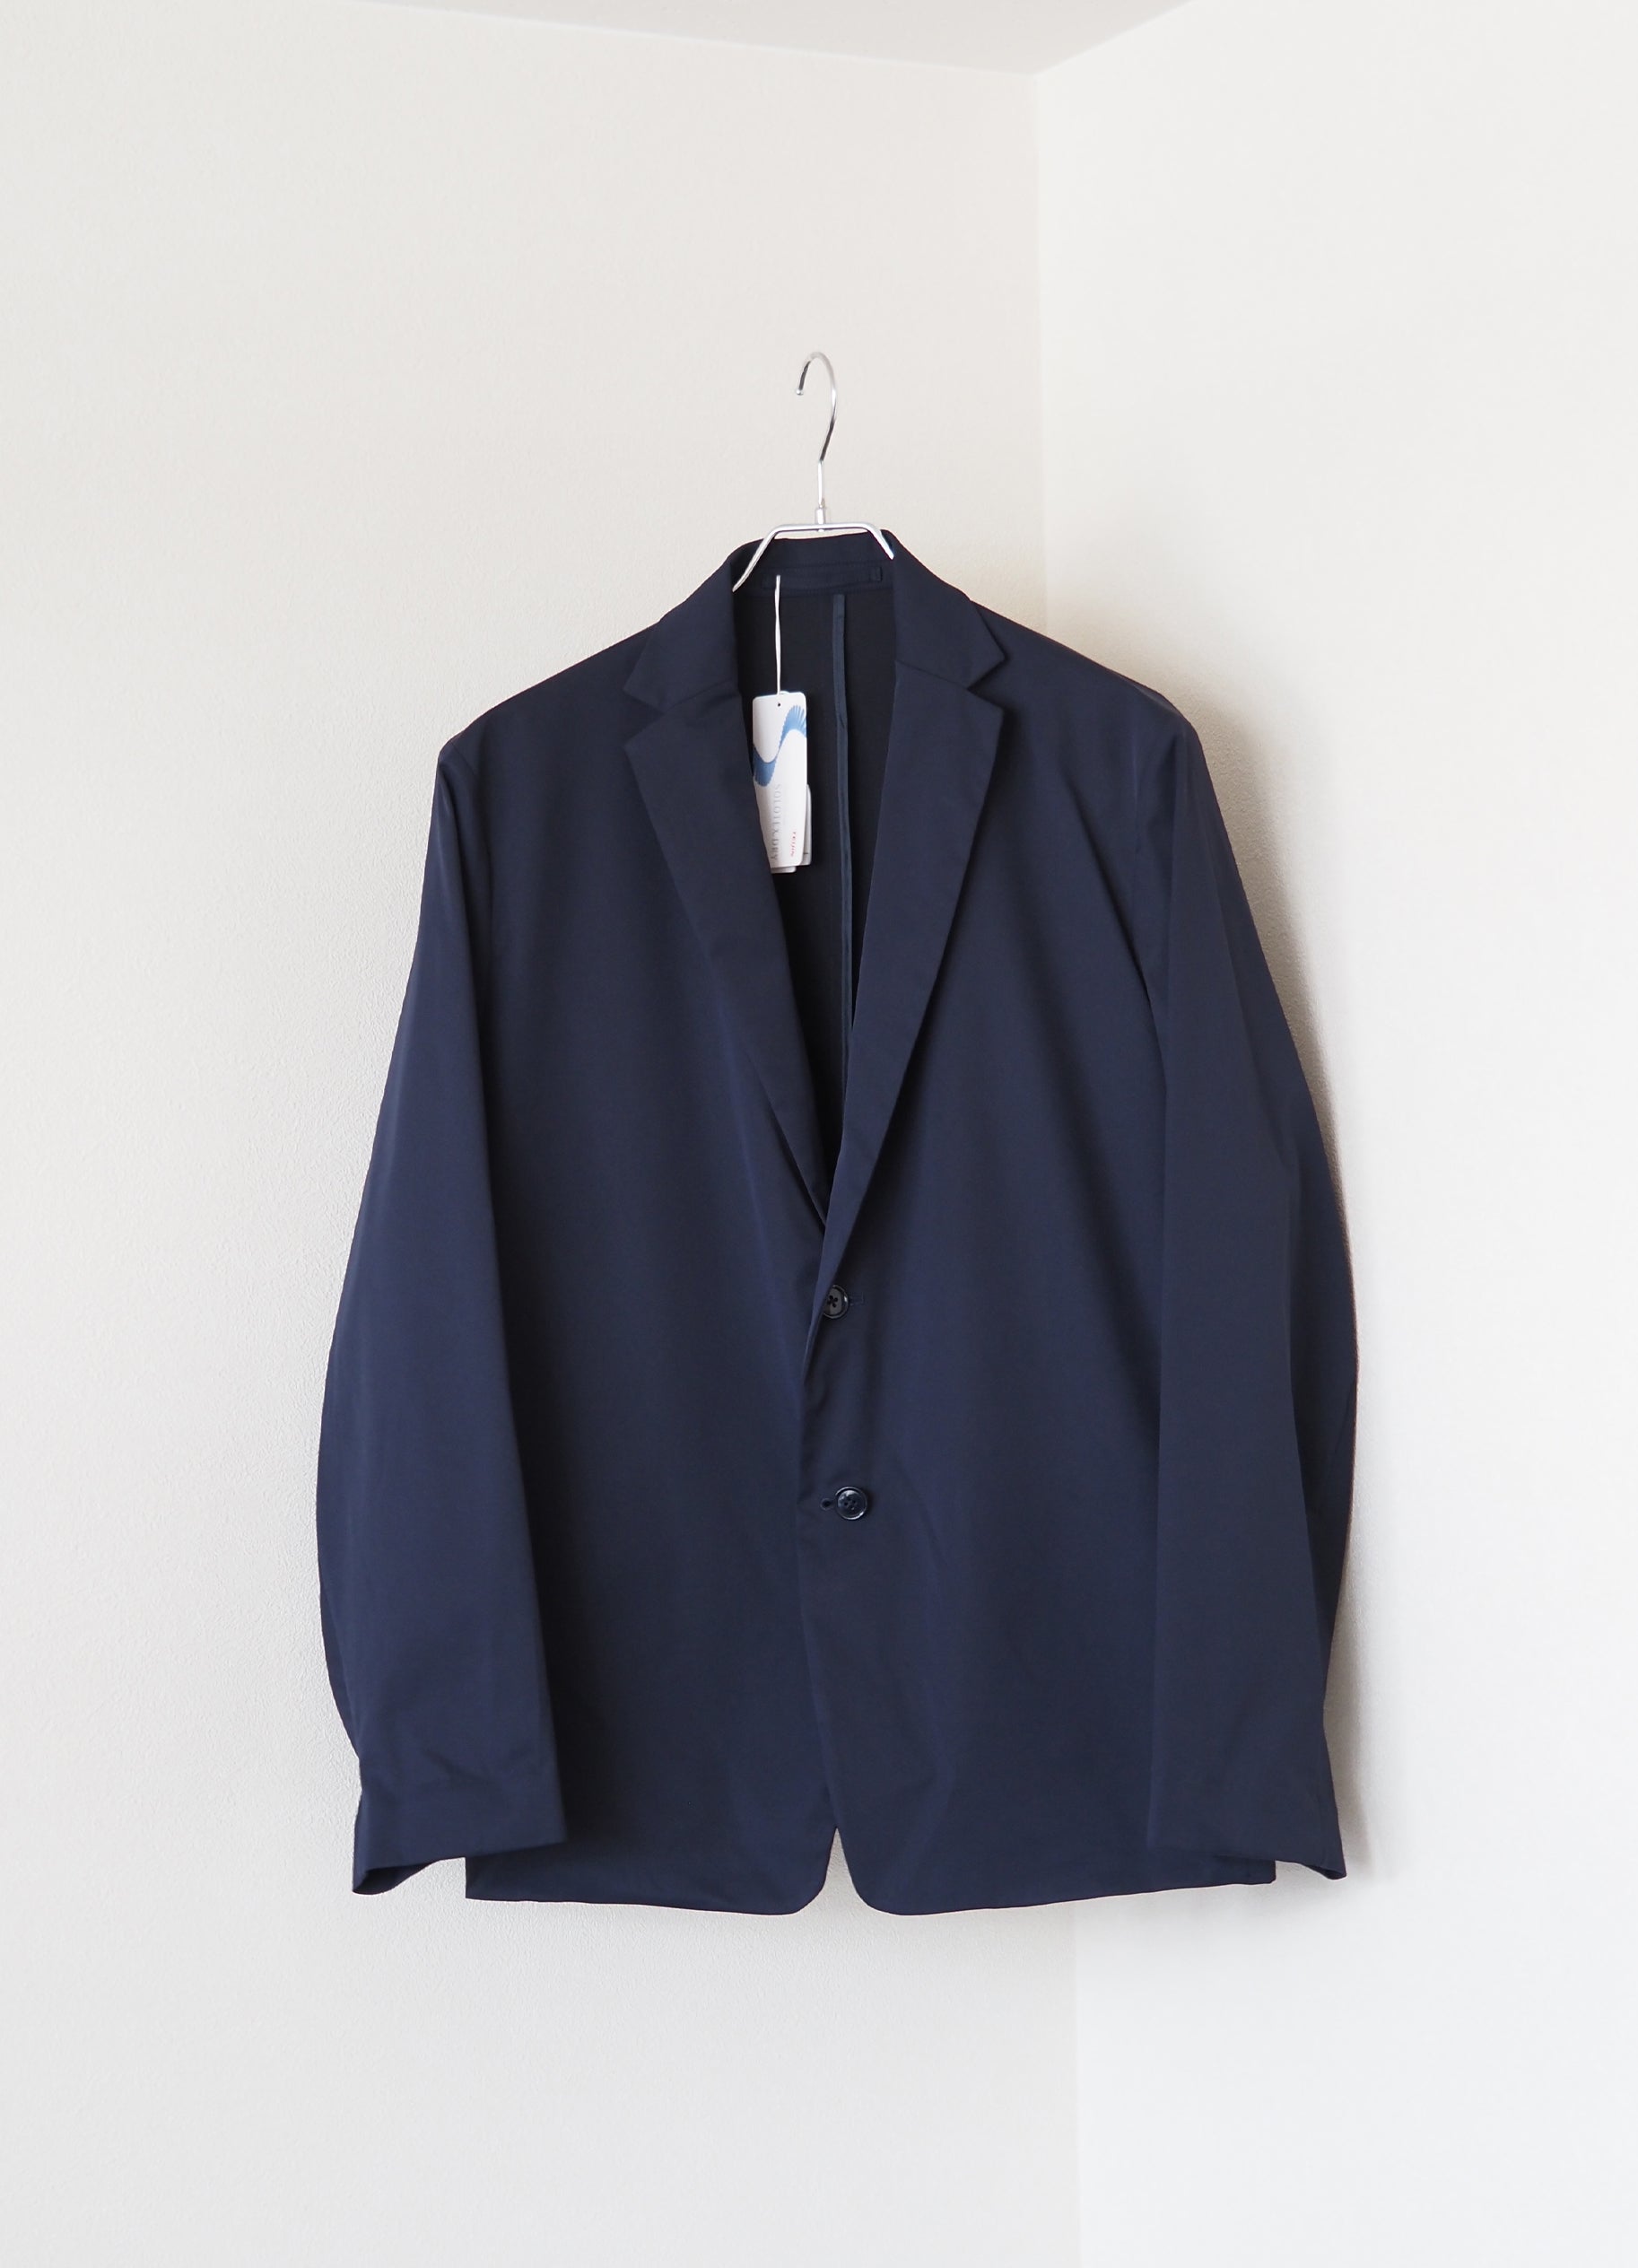 Sandinista / New Normal Solotex® Suit Jacket[DS-SJ02] 【島根県出雲